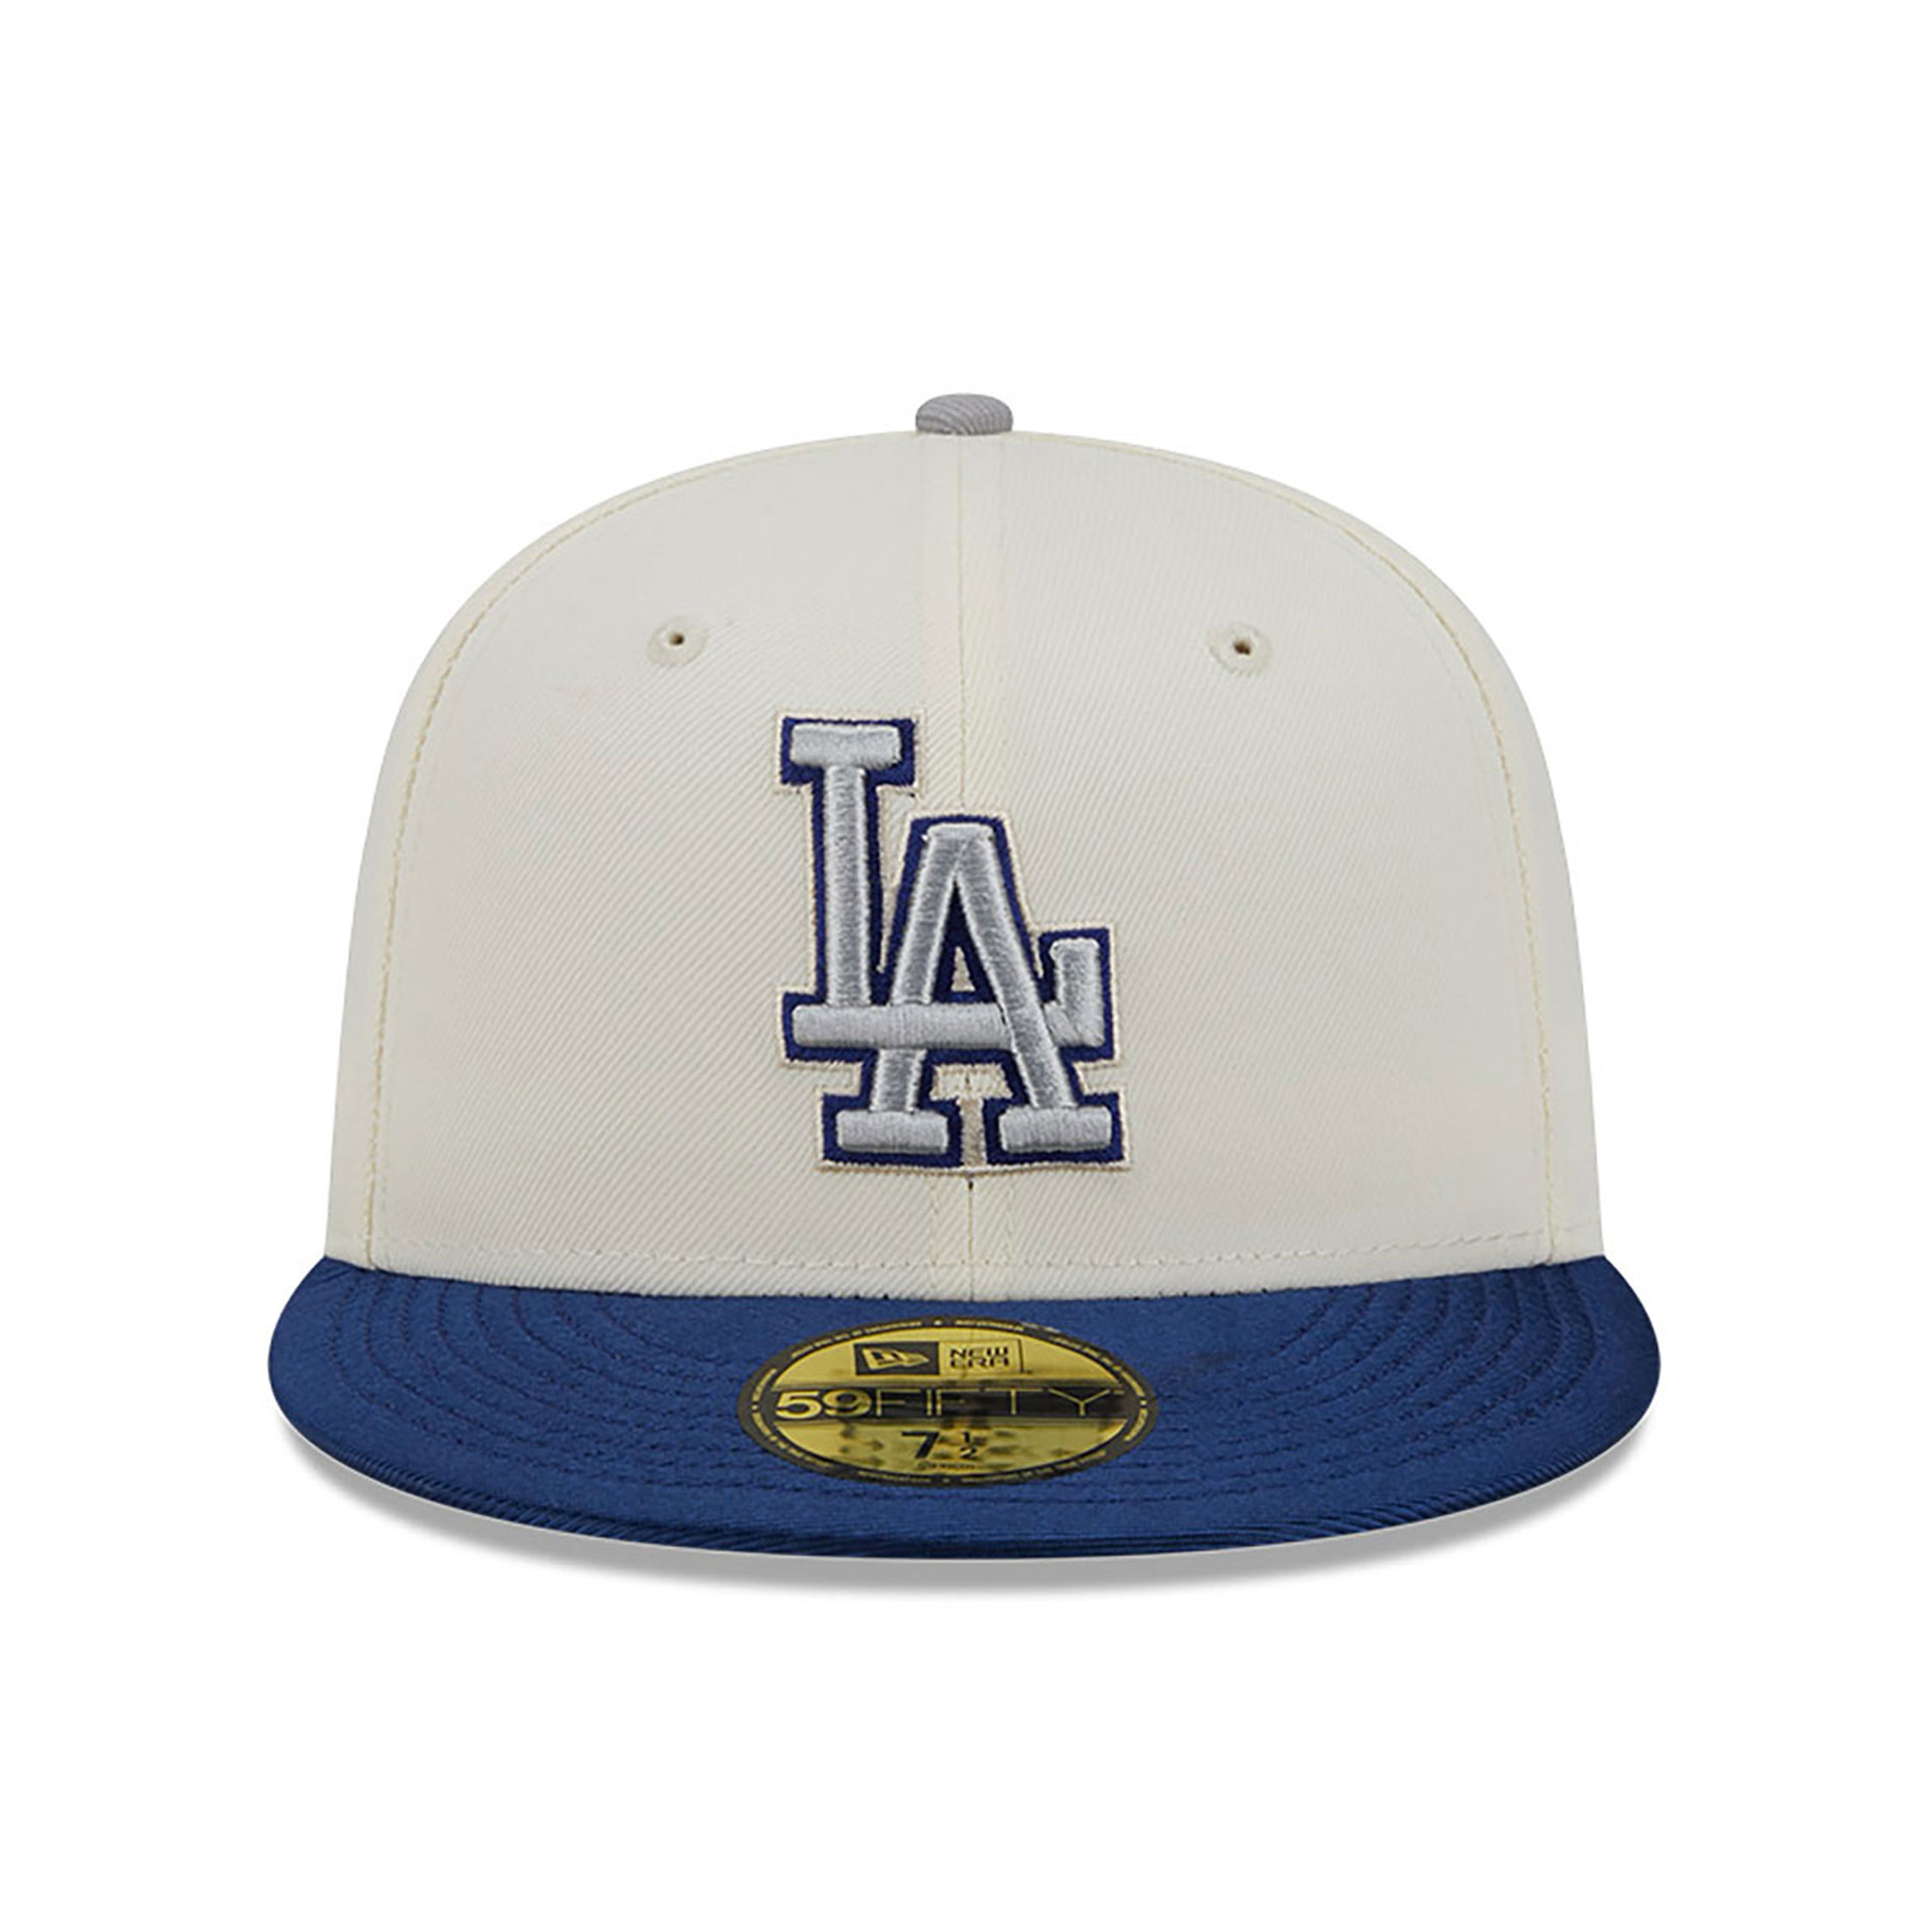 Gorra New Era LA Dodgers Team Shimmer 59FIFTY Fitted